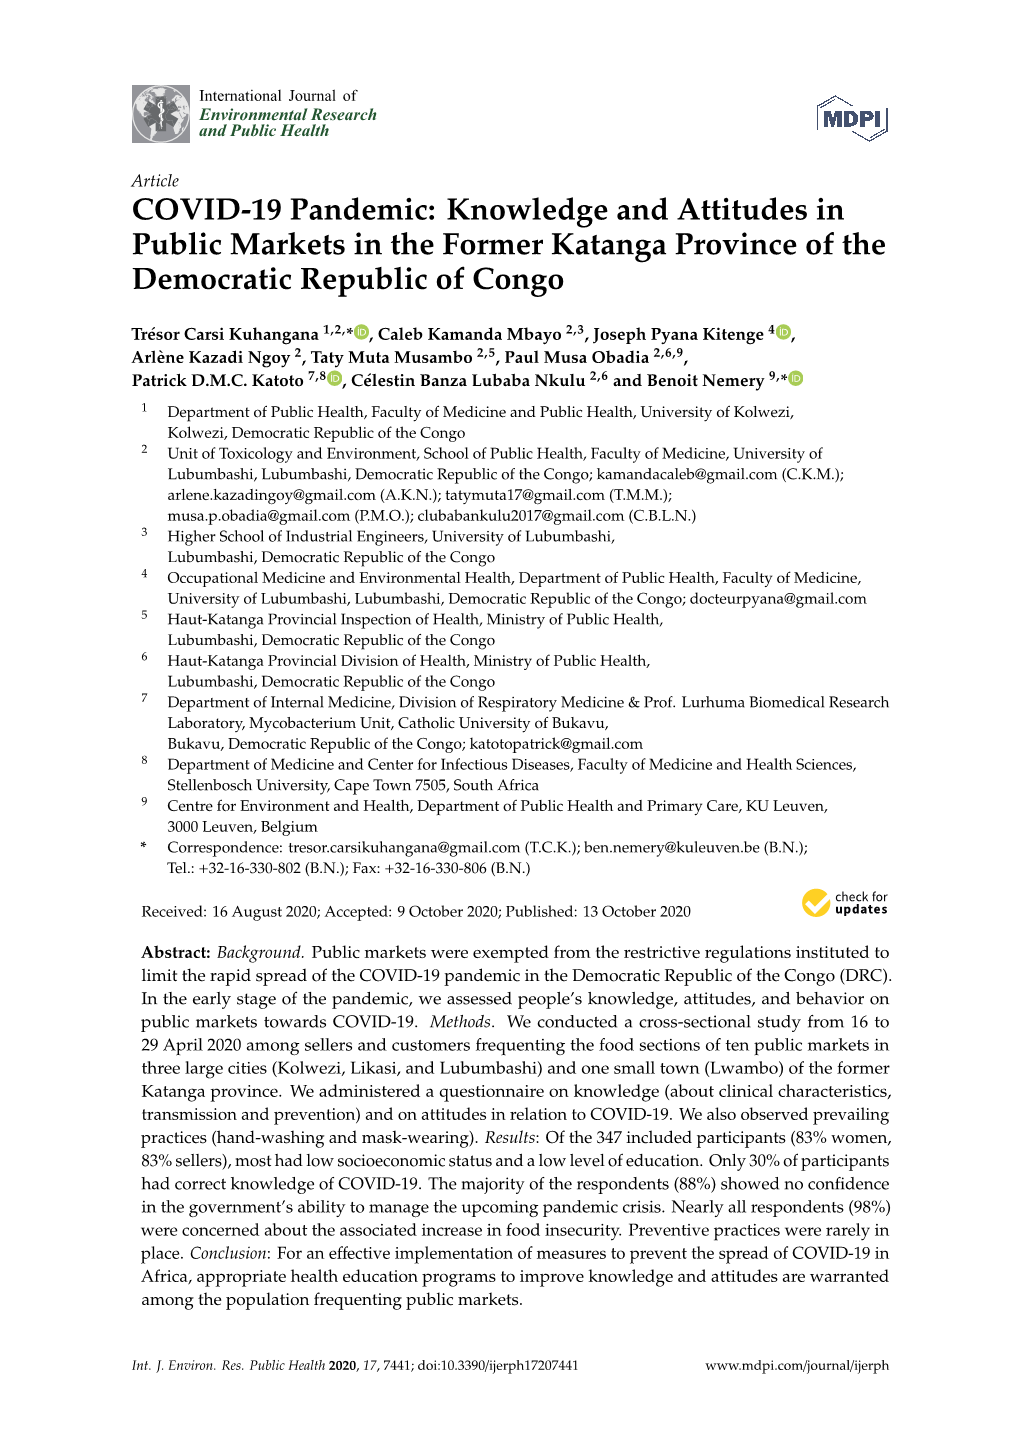 COVID-19 Pandemic: Knowledge and Attitudes in Public Markets in the Former Katanga Province of the Democratic Republic of Congo